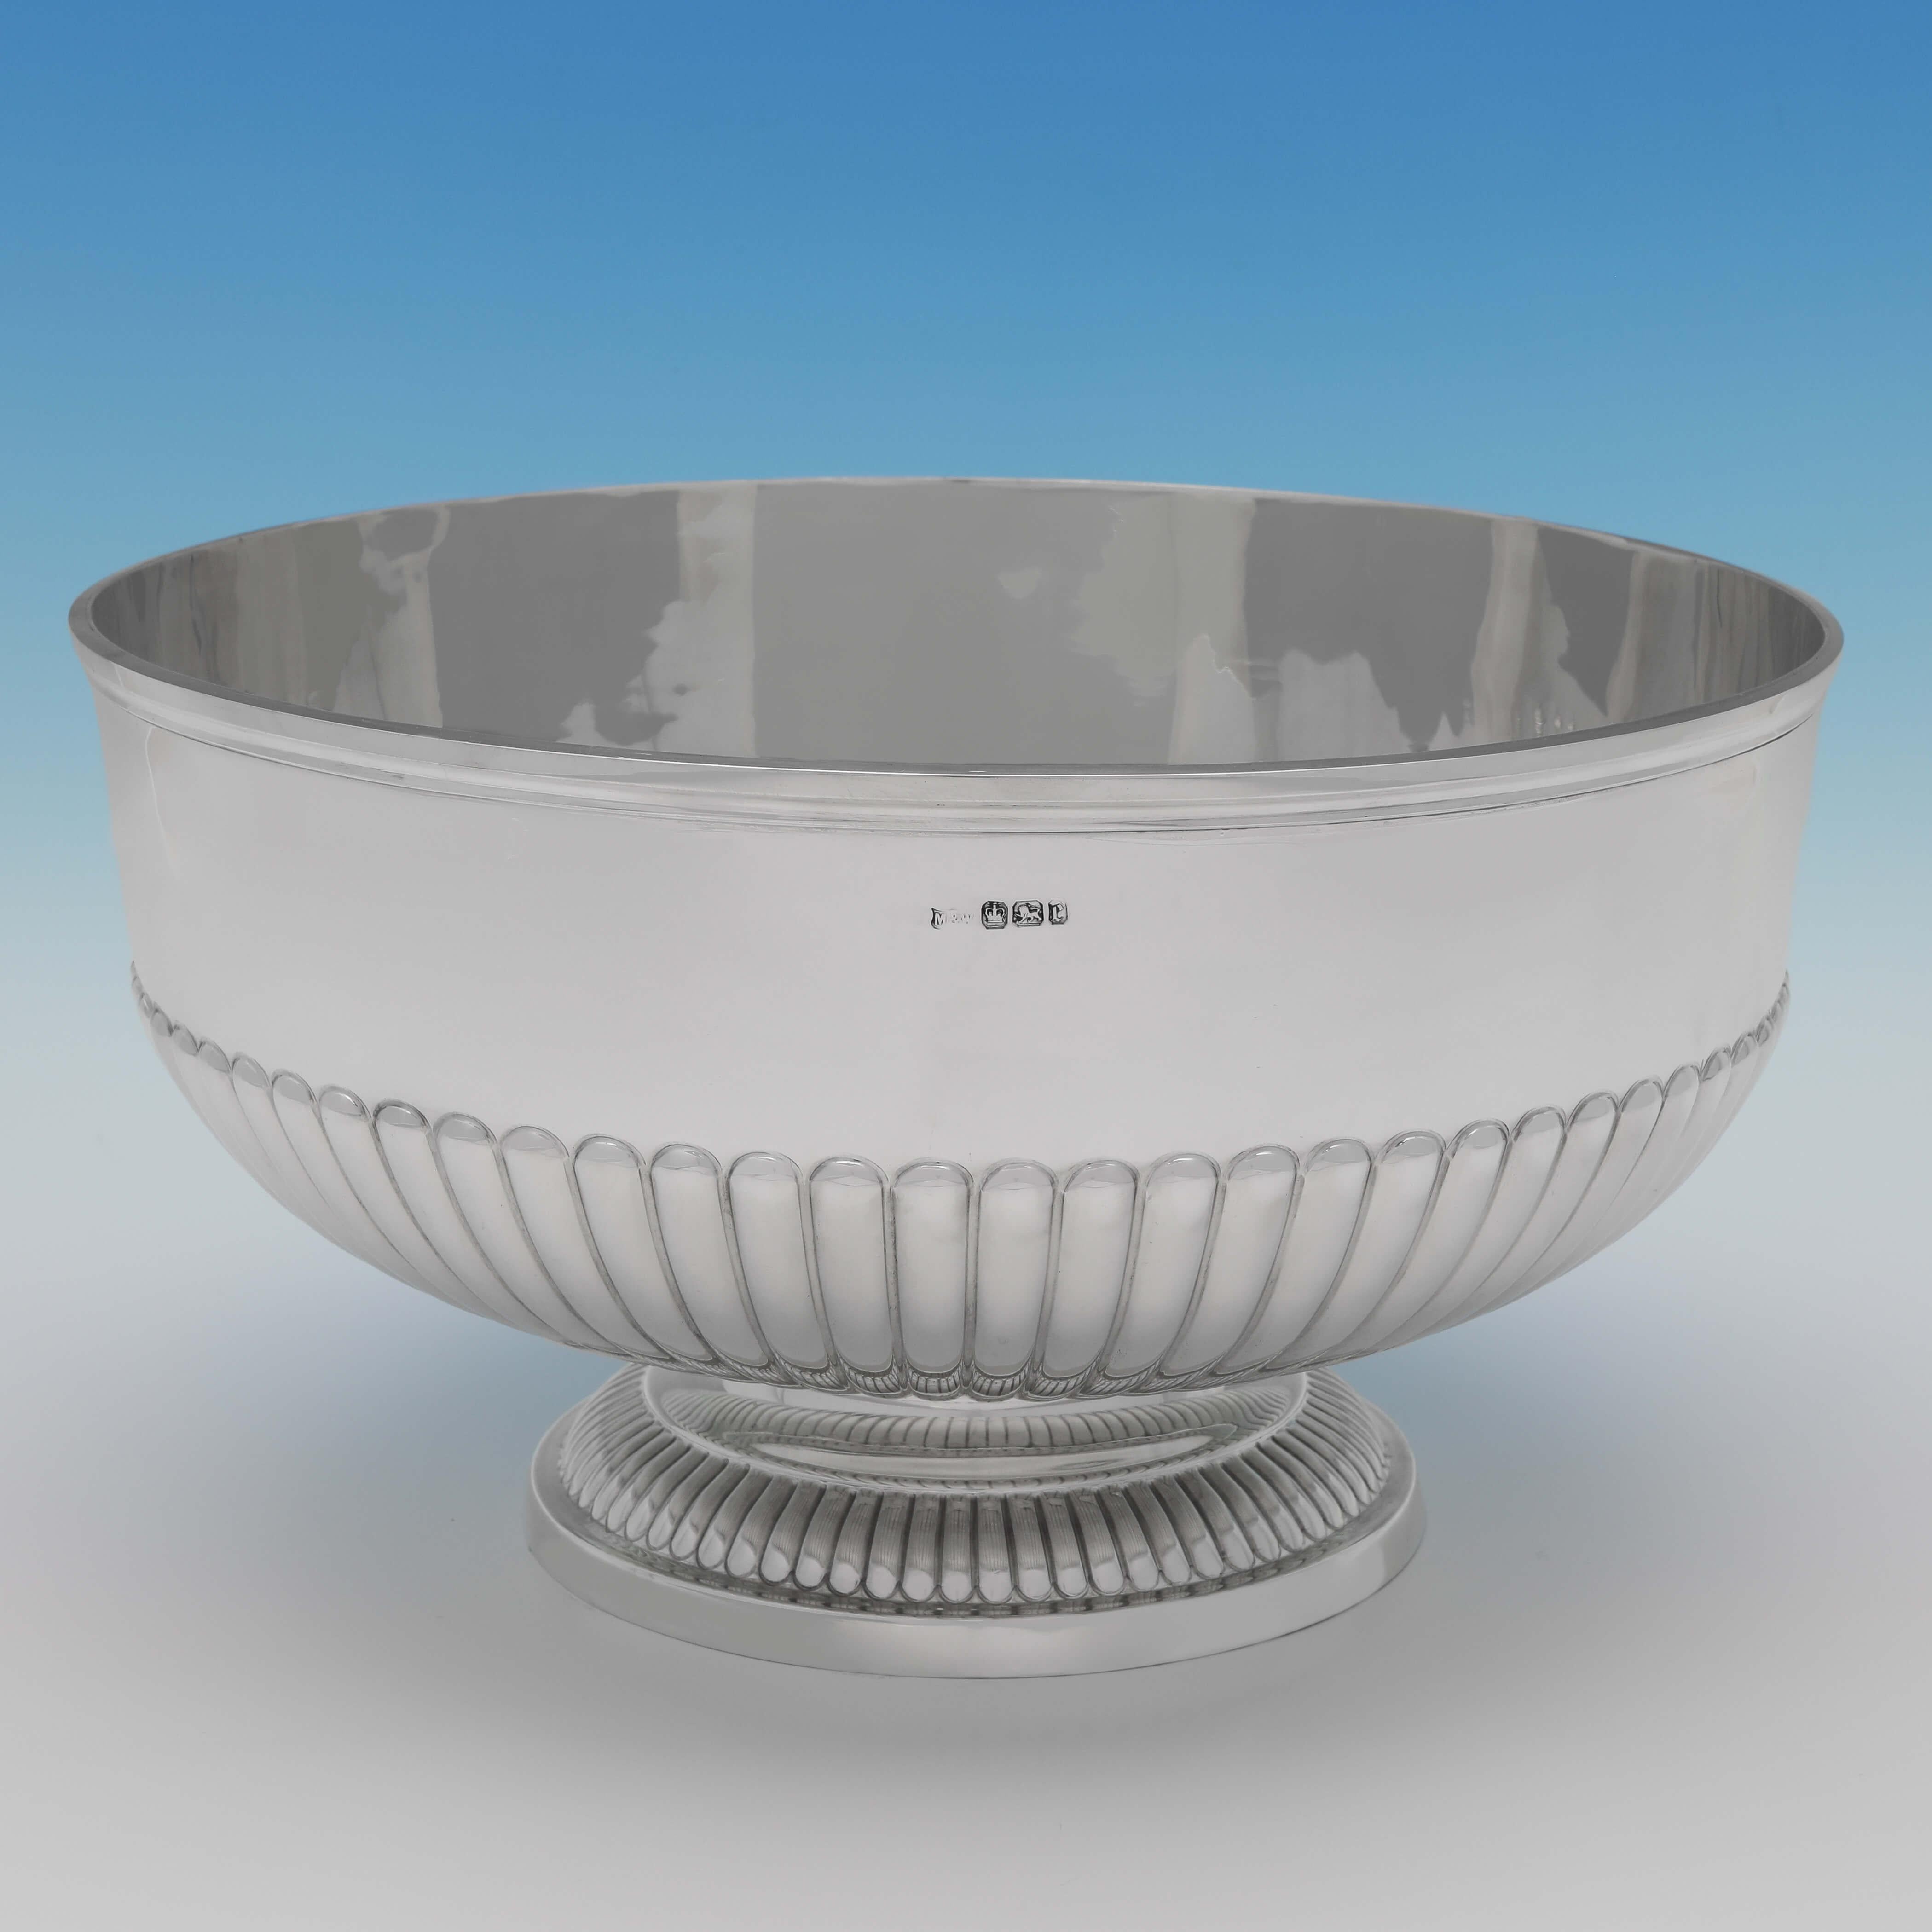 Hallmarked in Sheffield in 1895 by Mappin & Webb, this handsome, Victorian, Antique Sterling Silver Bowl, features half fluting and reed borders. The bowl measures 6.75